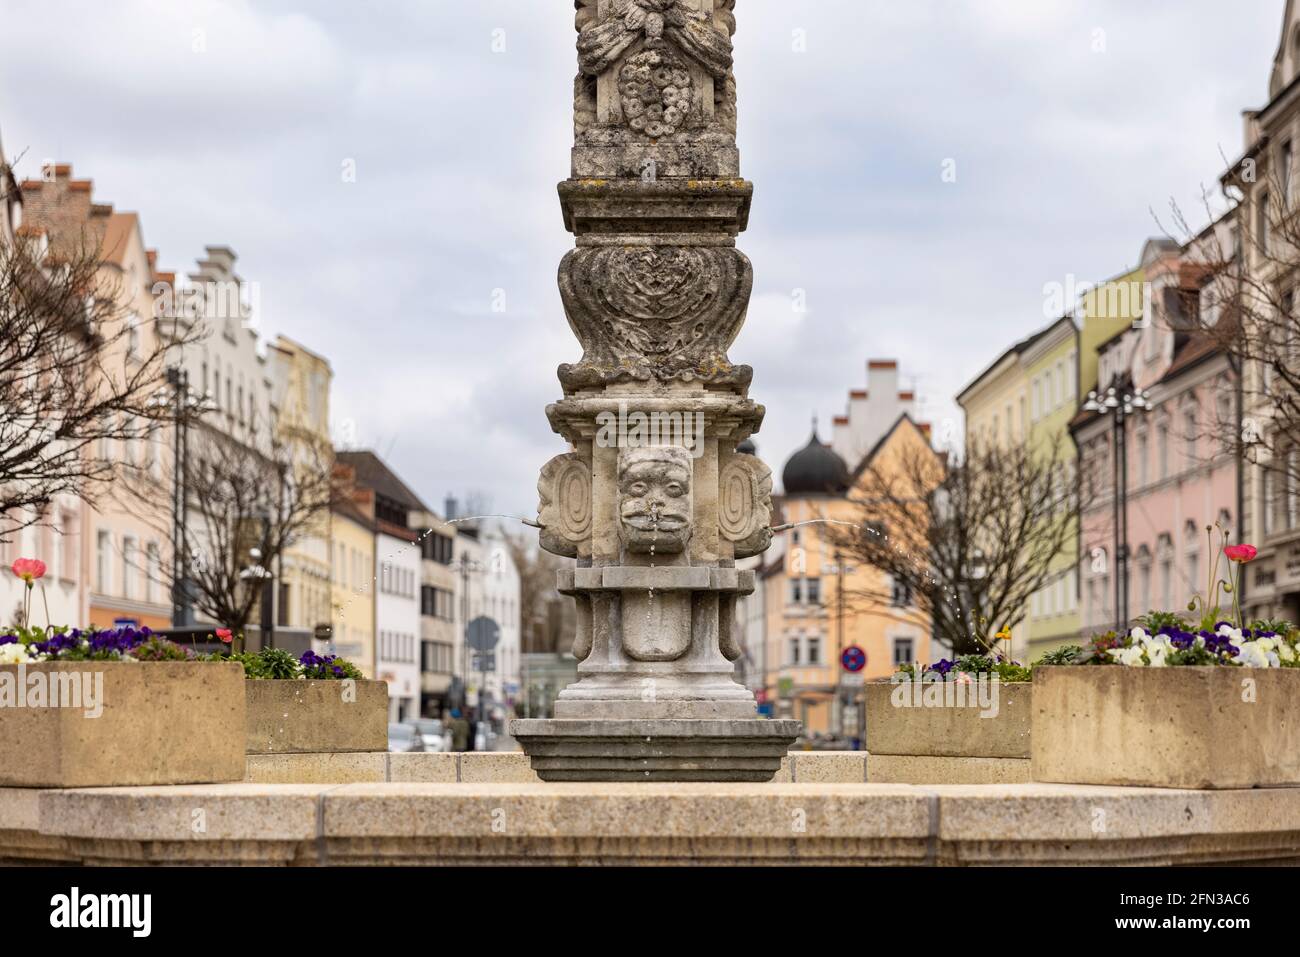 Historical gothic style statue and fountain in Bavarian city Straubing in Germany. Stock Photo